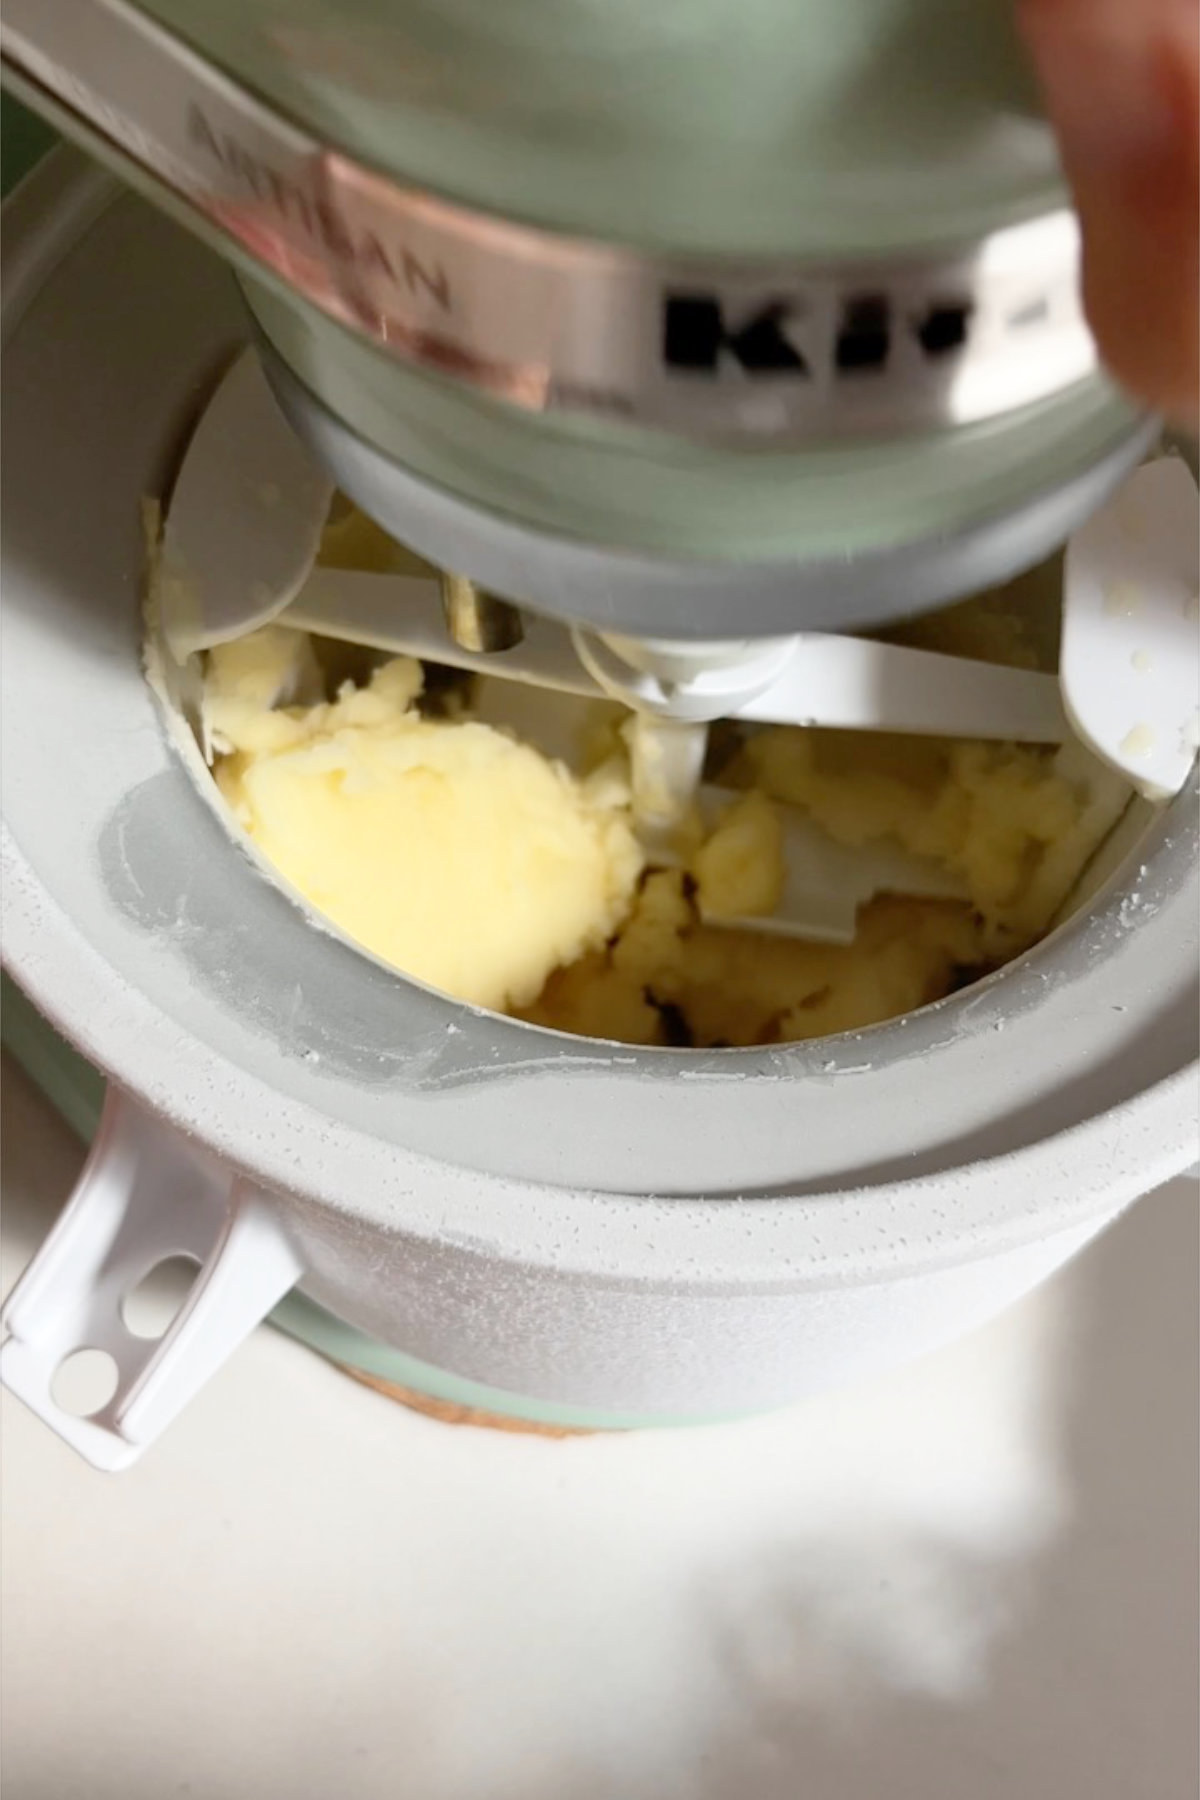 Churning yellow Dole Whip in an ice cream maker attachment.